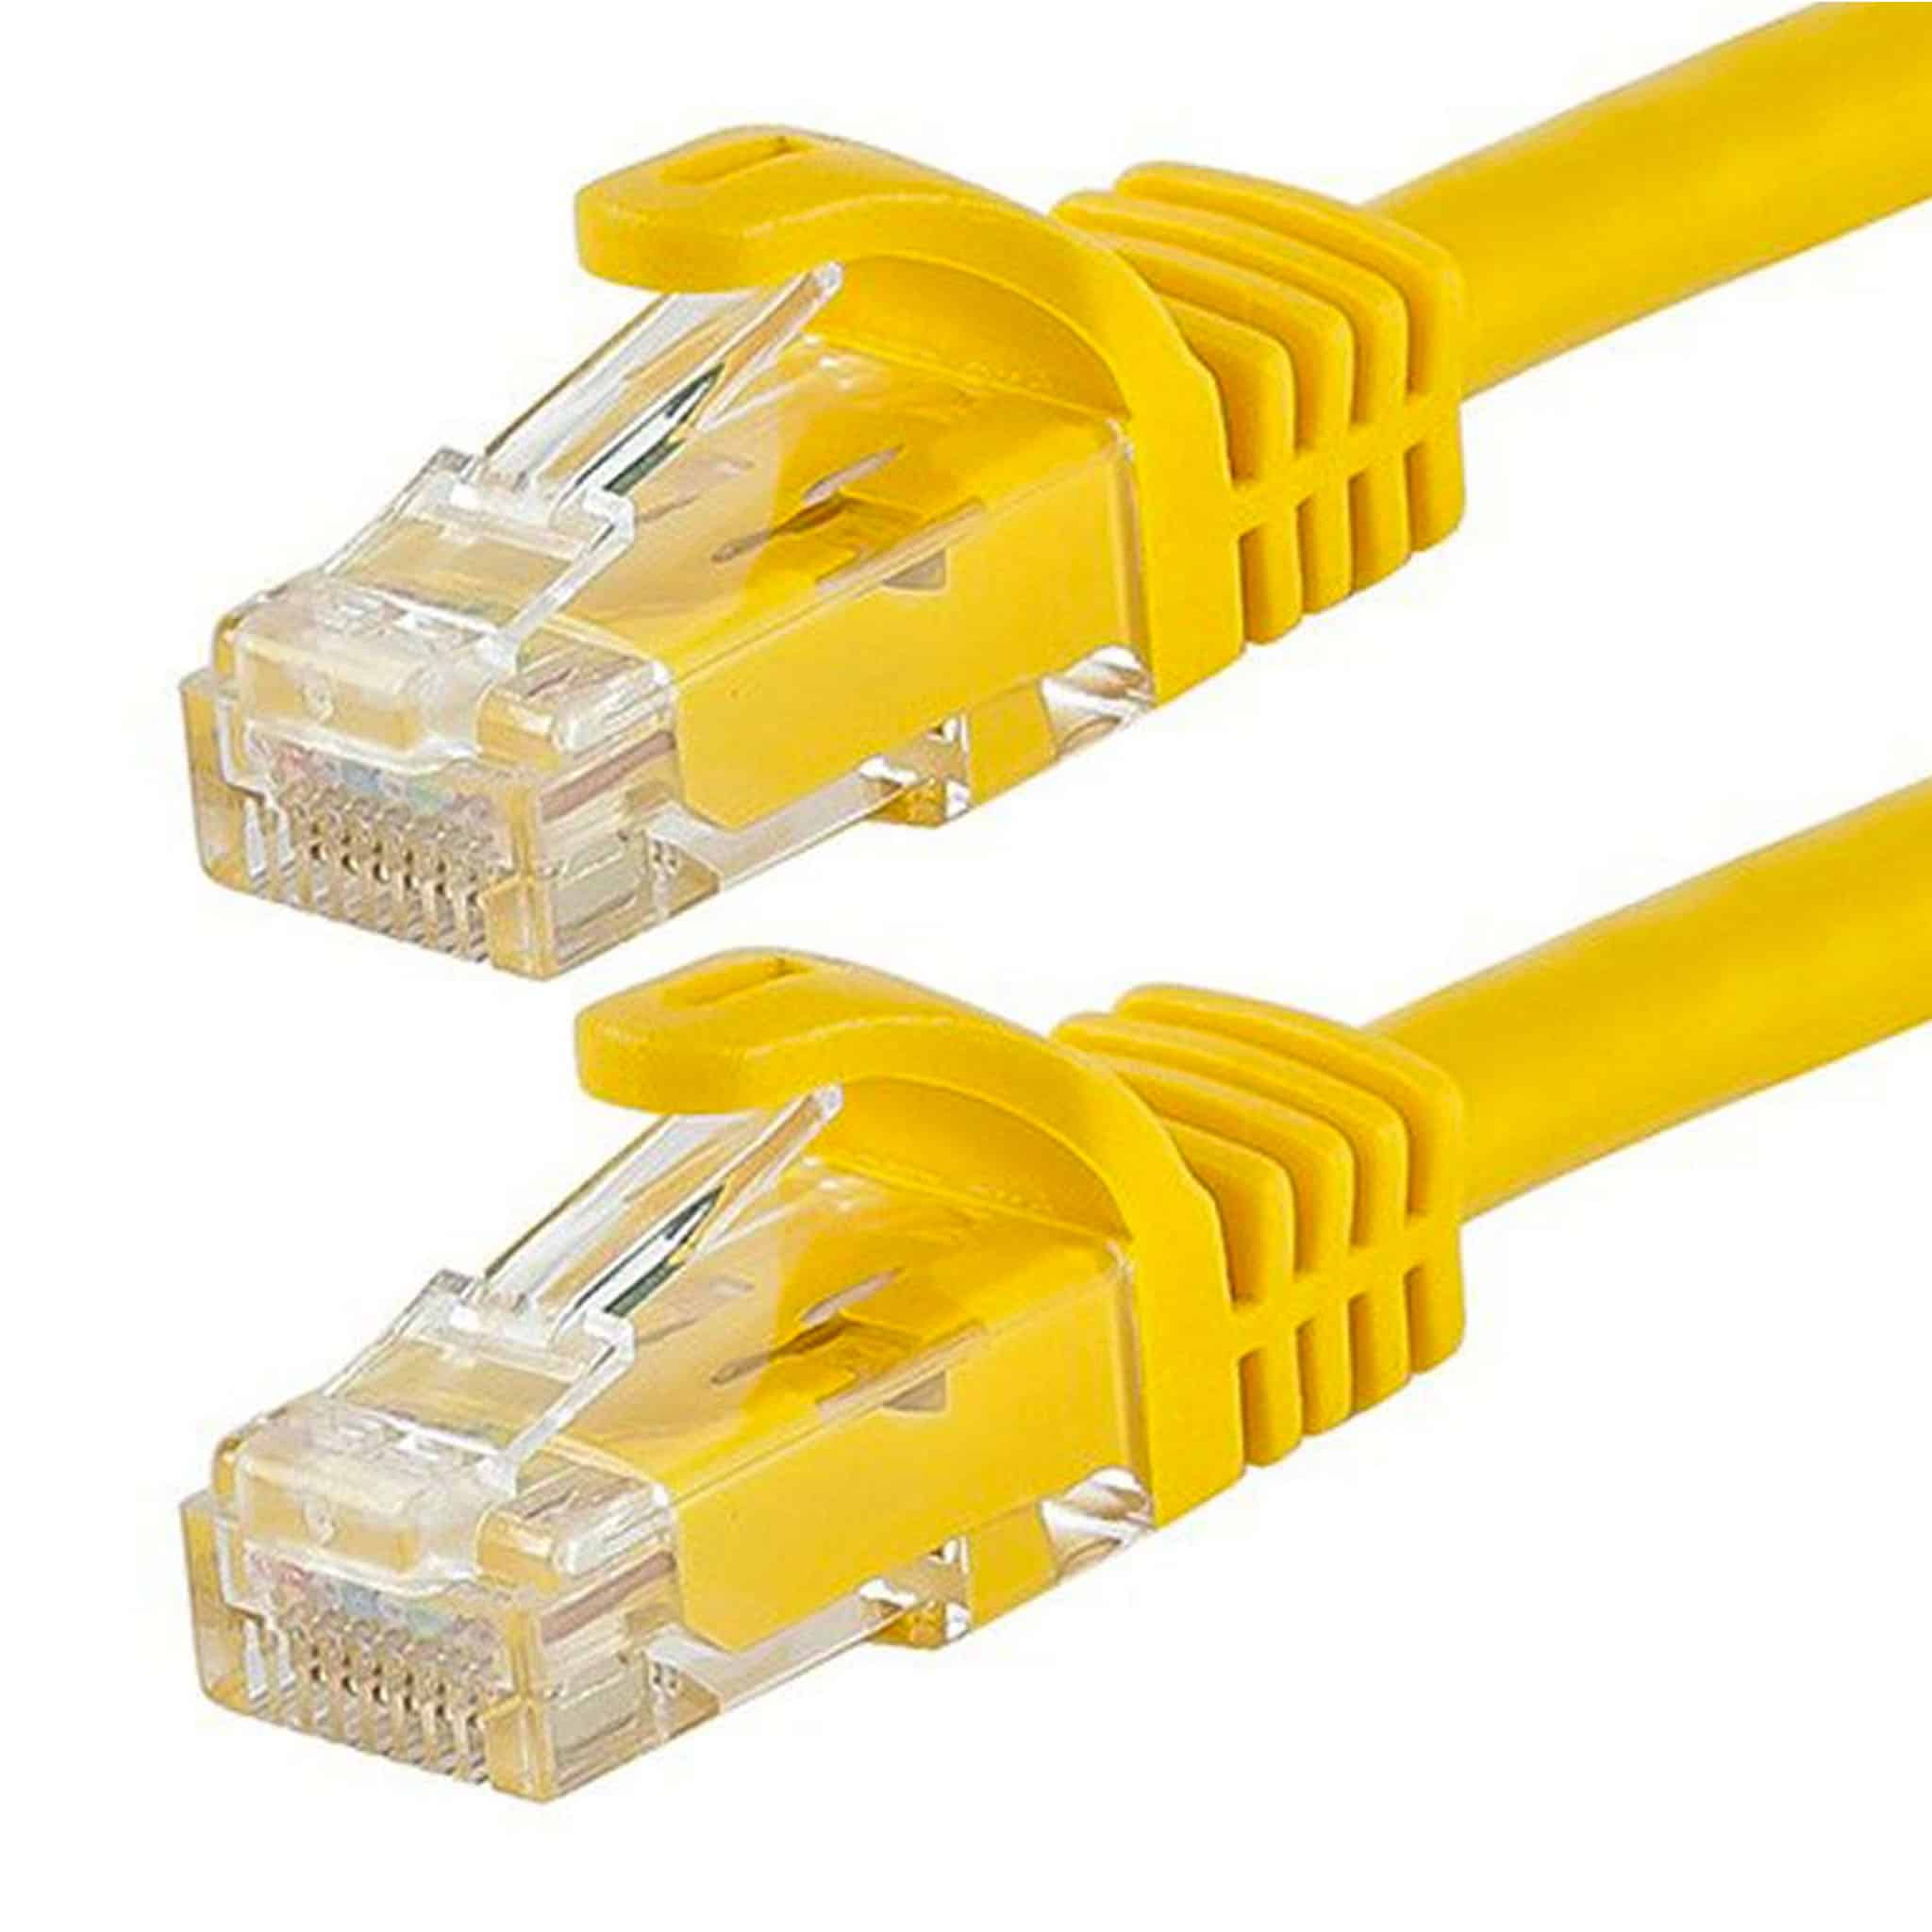 Astrotek CAT6 Ethernet Cable Yellow